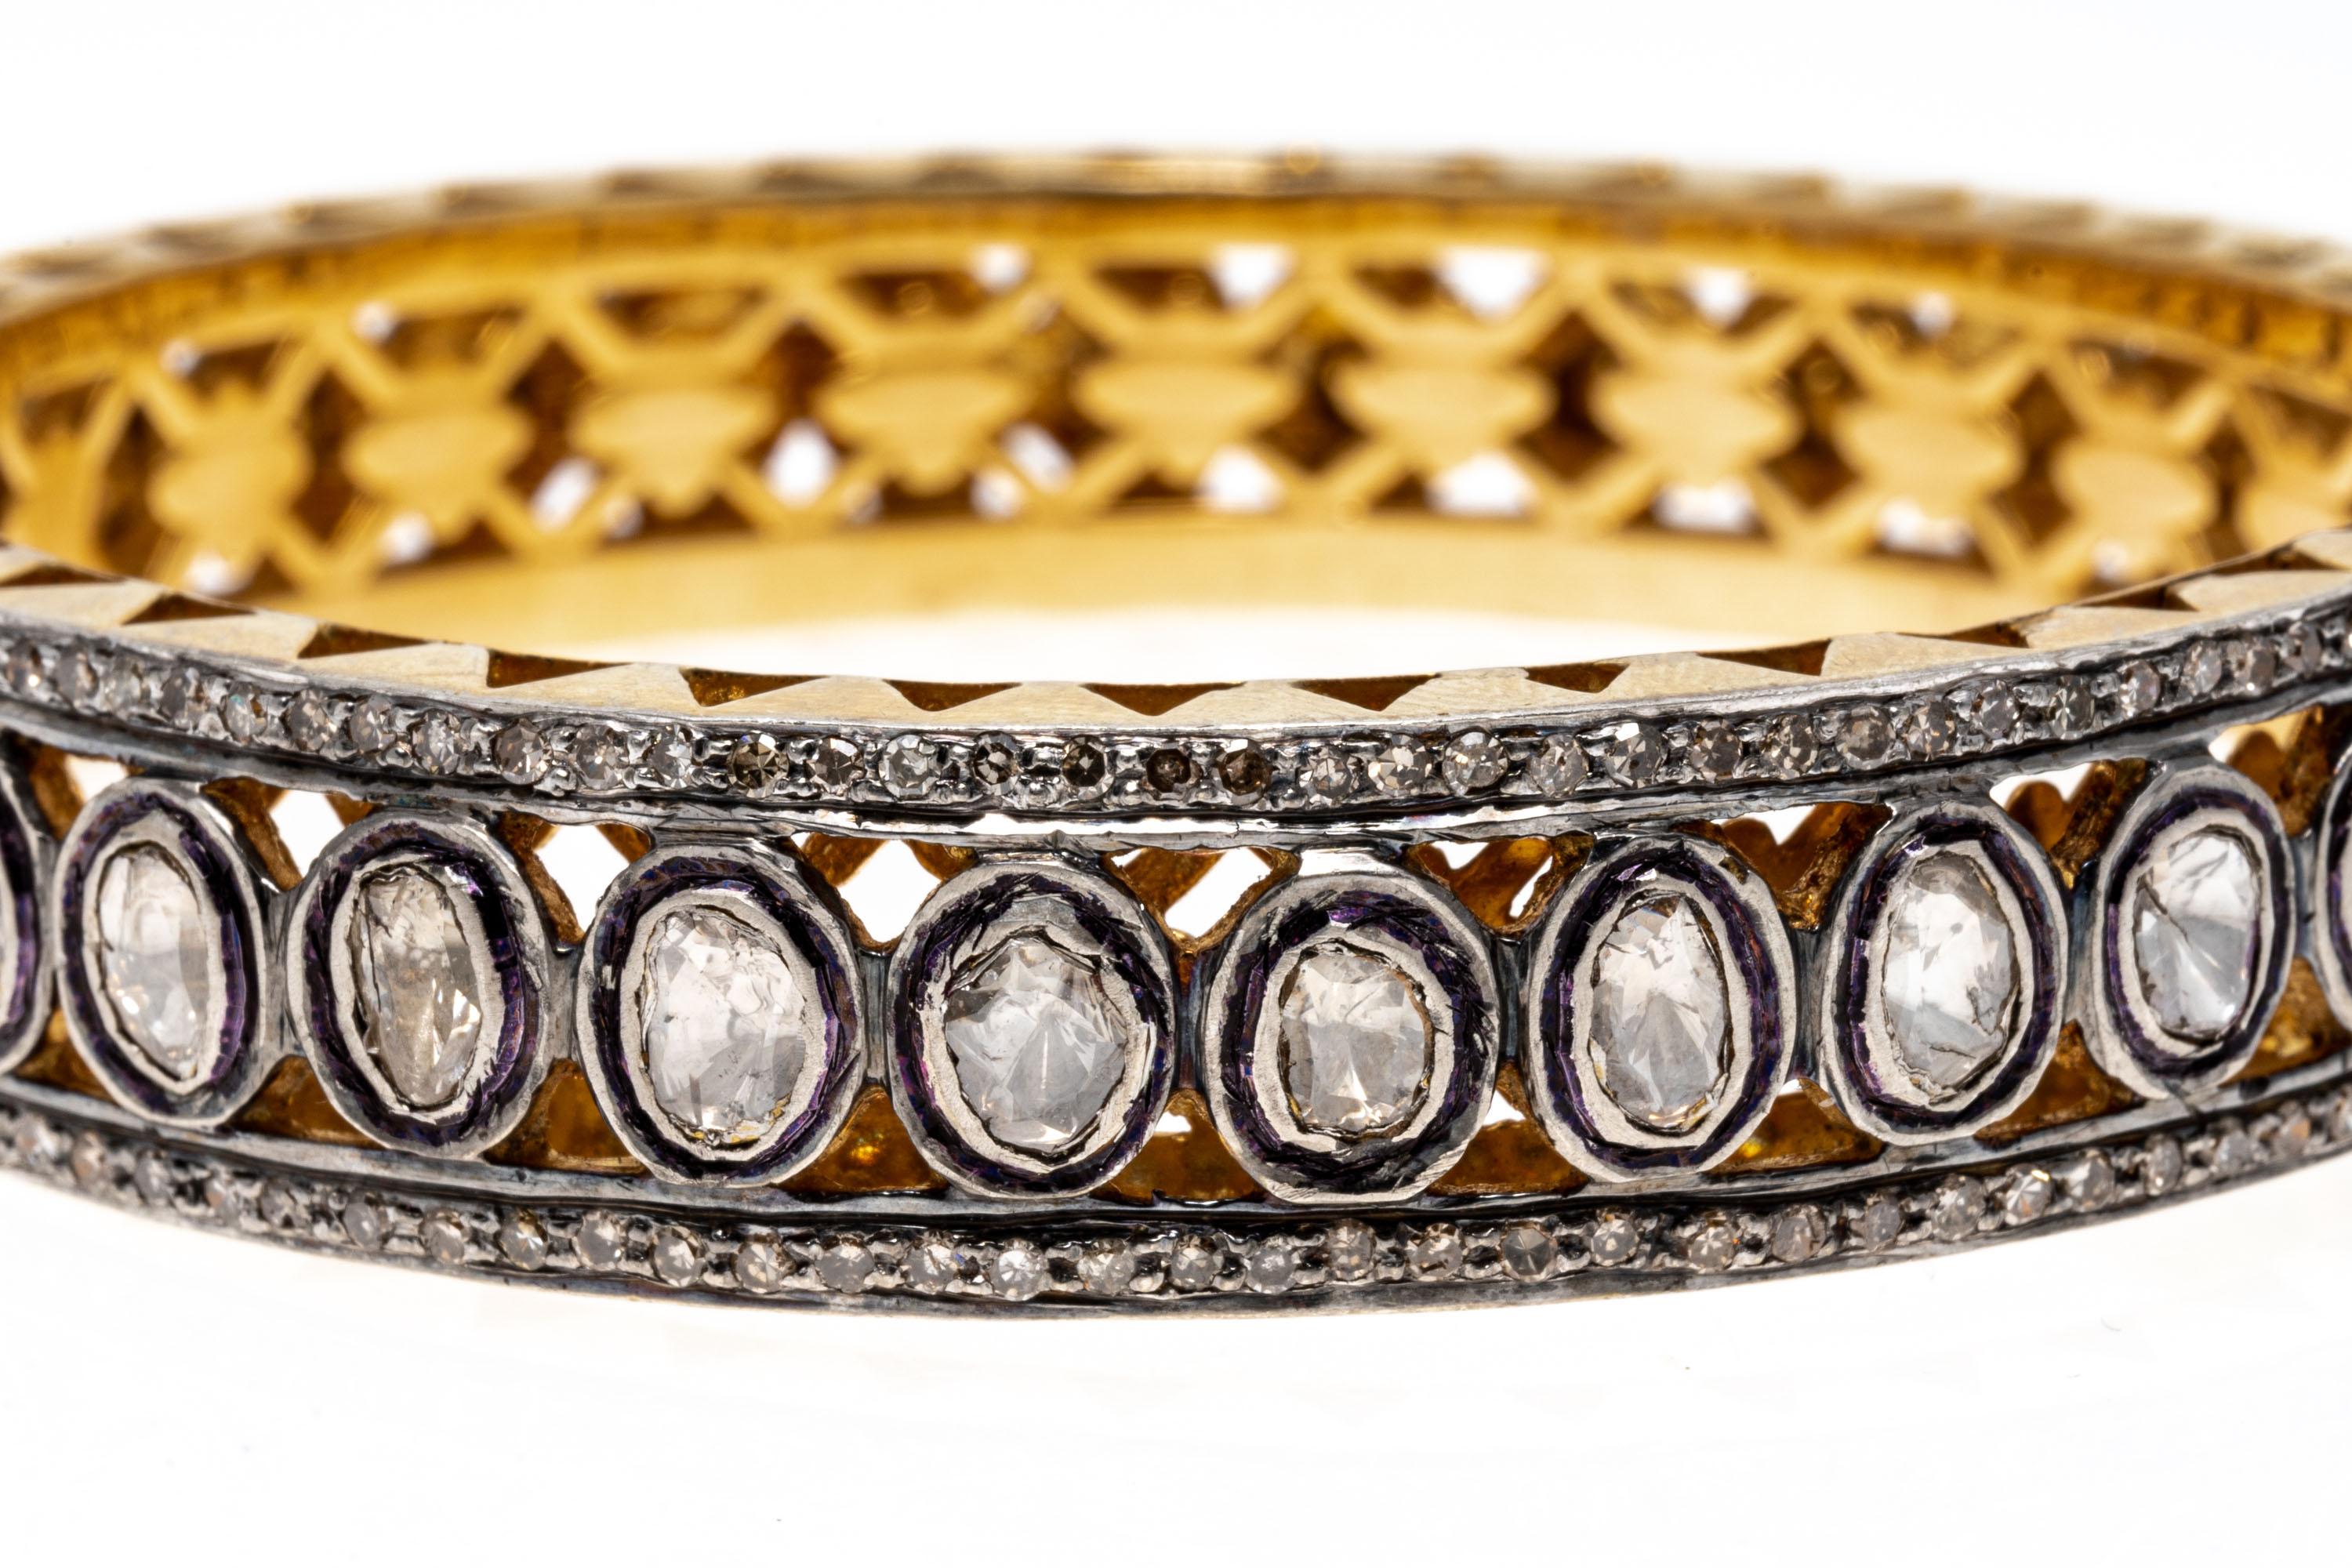 Sterling silver vermeil bracelet. This stunning bracelet is a hinged bangle style, decorated in the center row with macle cut diamonds, bezel set. Framing the center on either side is a row of round faceted diamonds, approximately 1.10 TCW. The